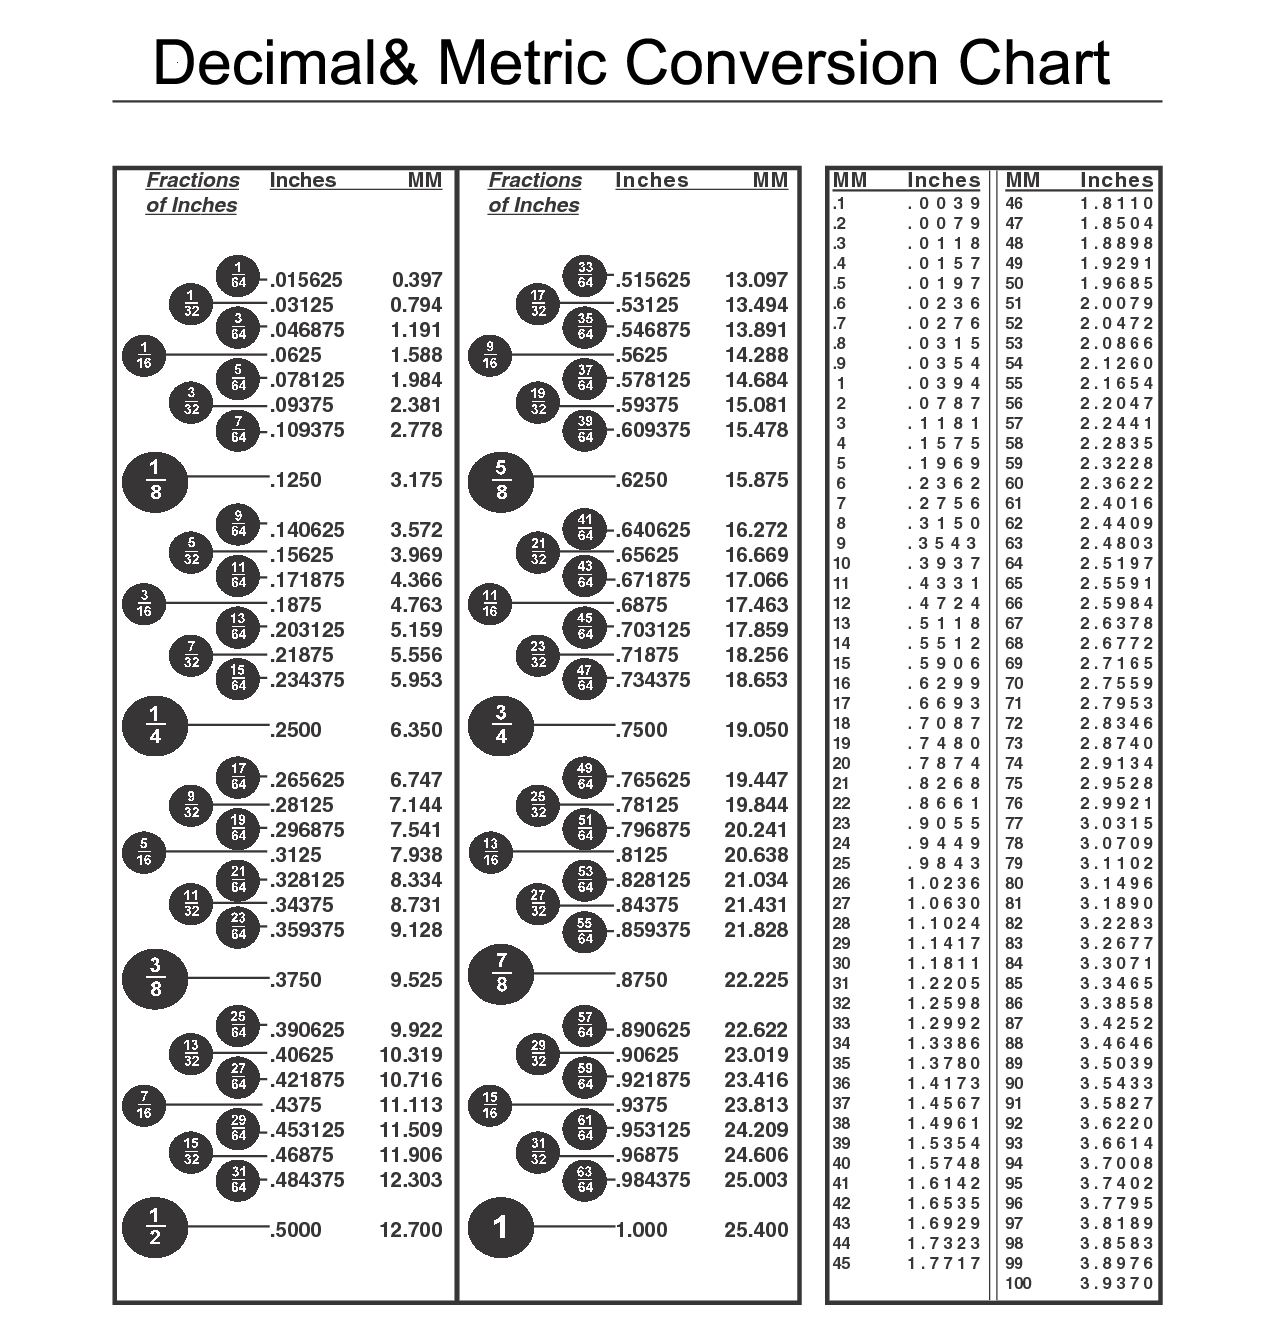 Conversion Chart - Moon Cutter Co., Inc. These kind of fractions are often used for sizes of screws, nails and thicknesses of metal etc, in inches.